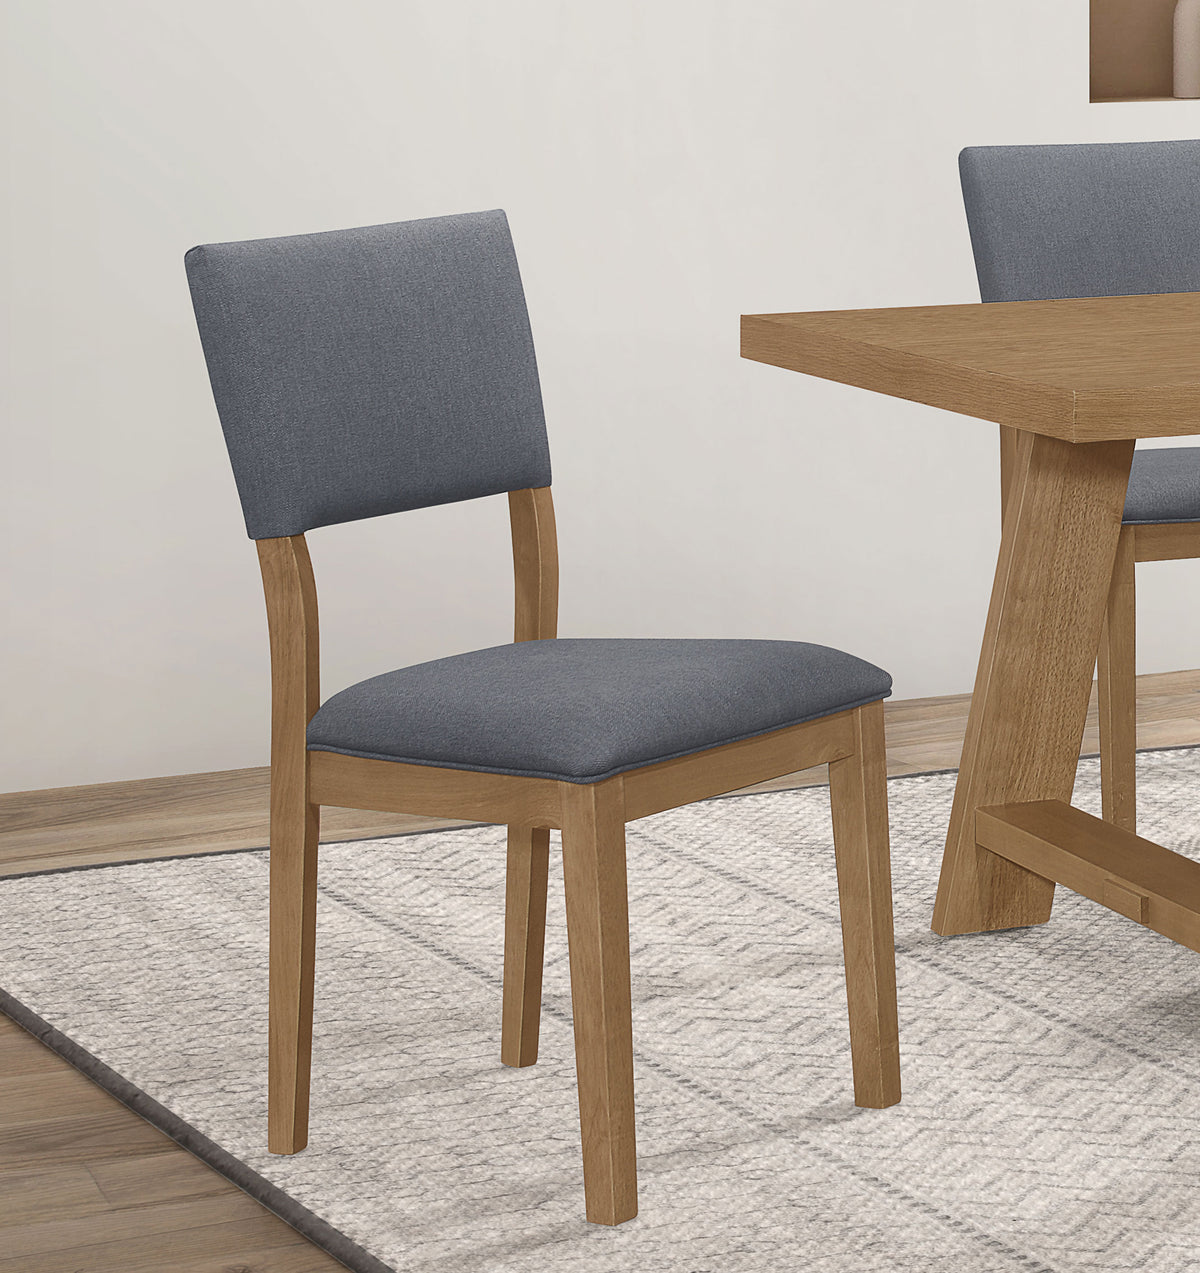 Sharon Open Back Padded Upholstered Dining Side Chair Blue and Brown (Set of 2)  Las Vegas Furniture Stores